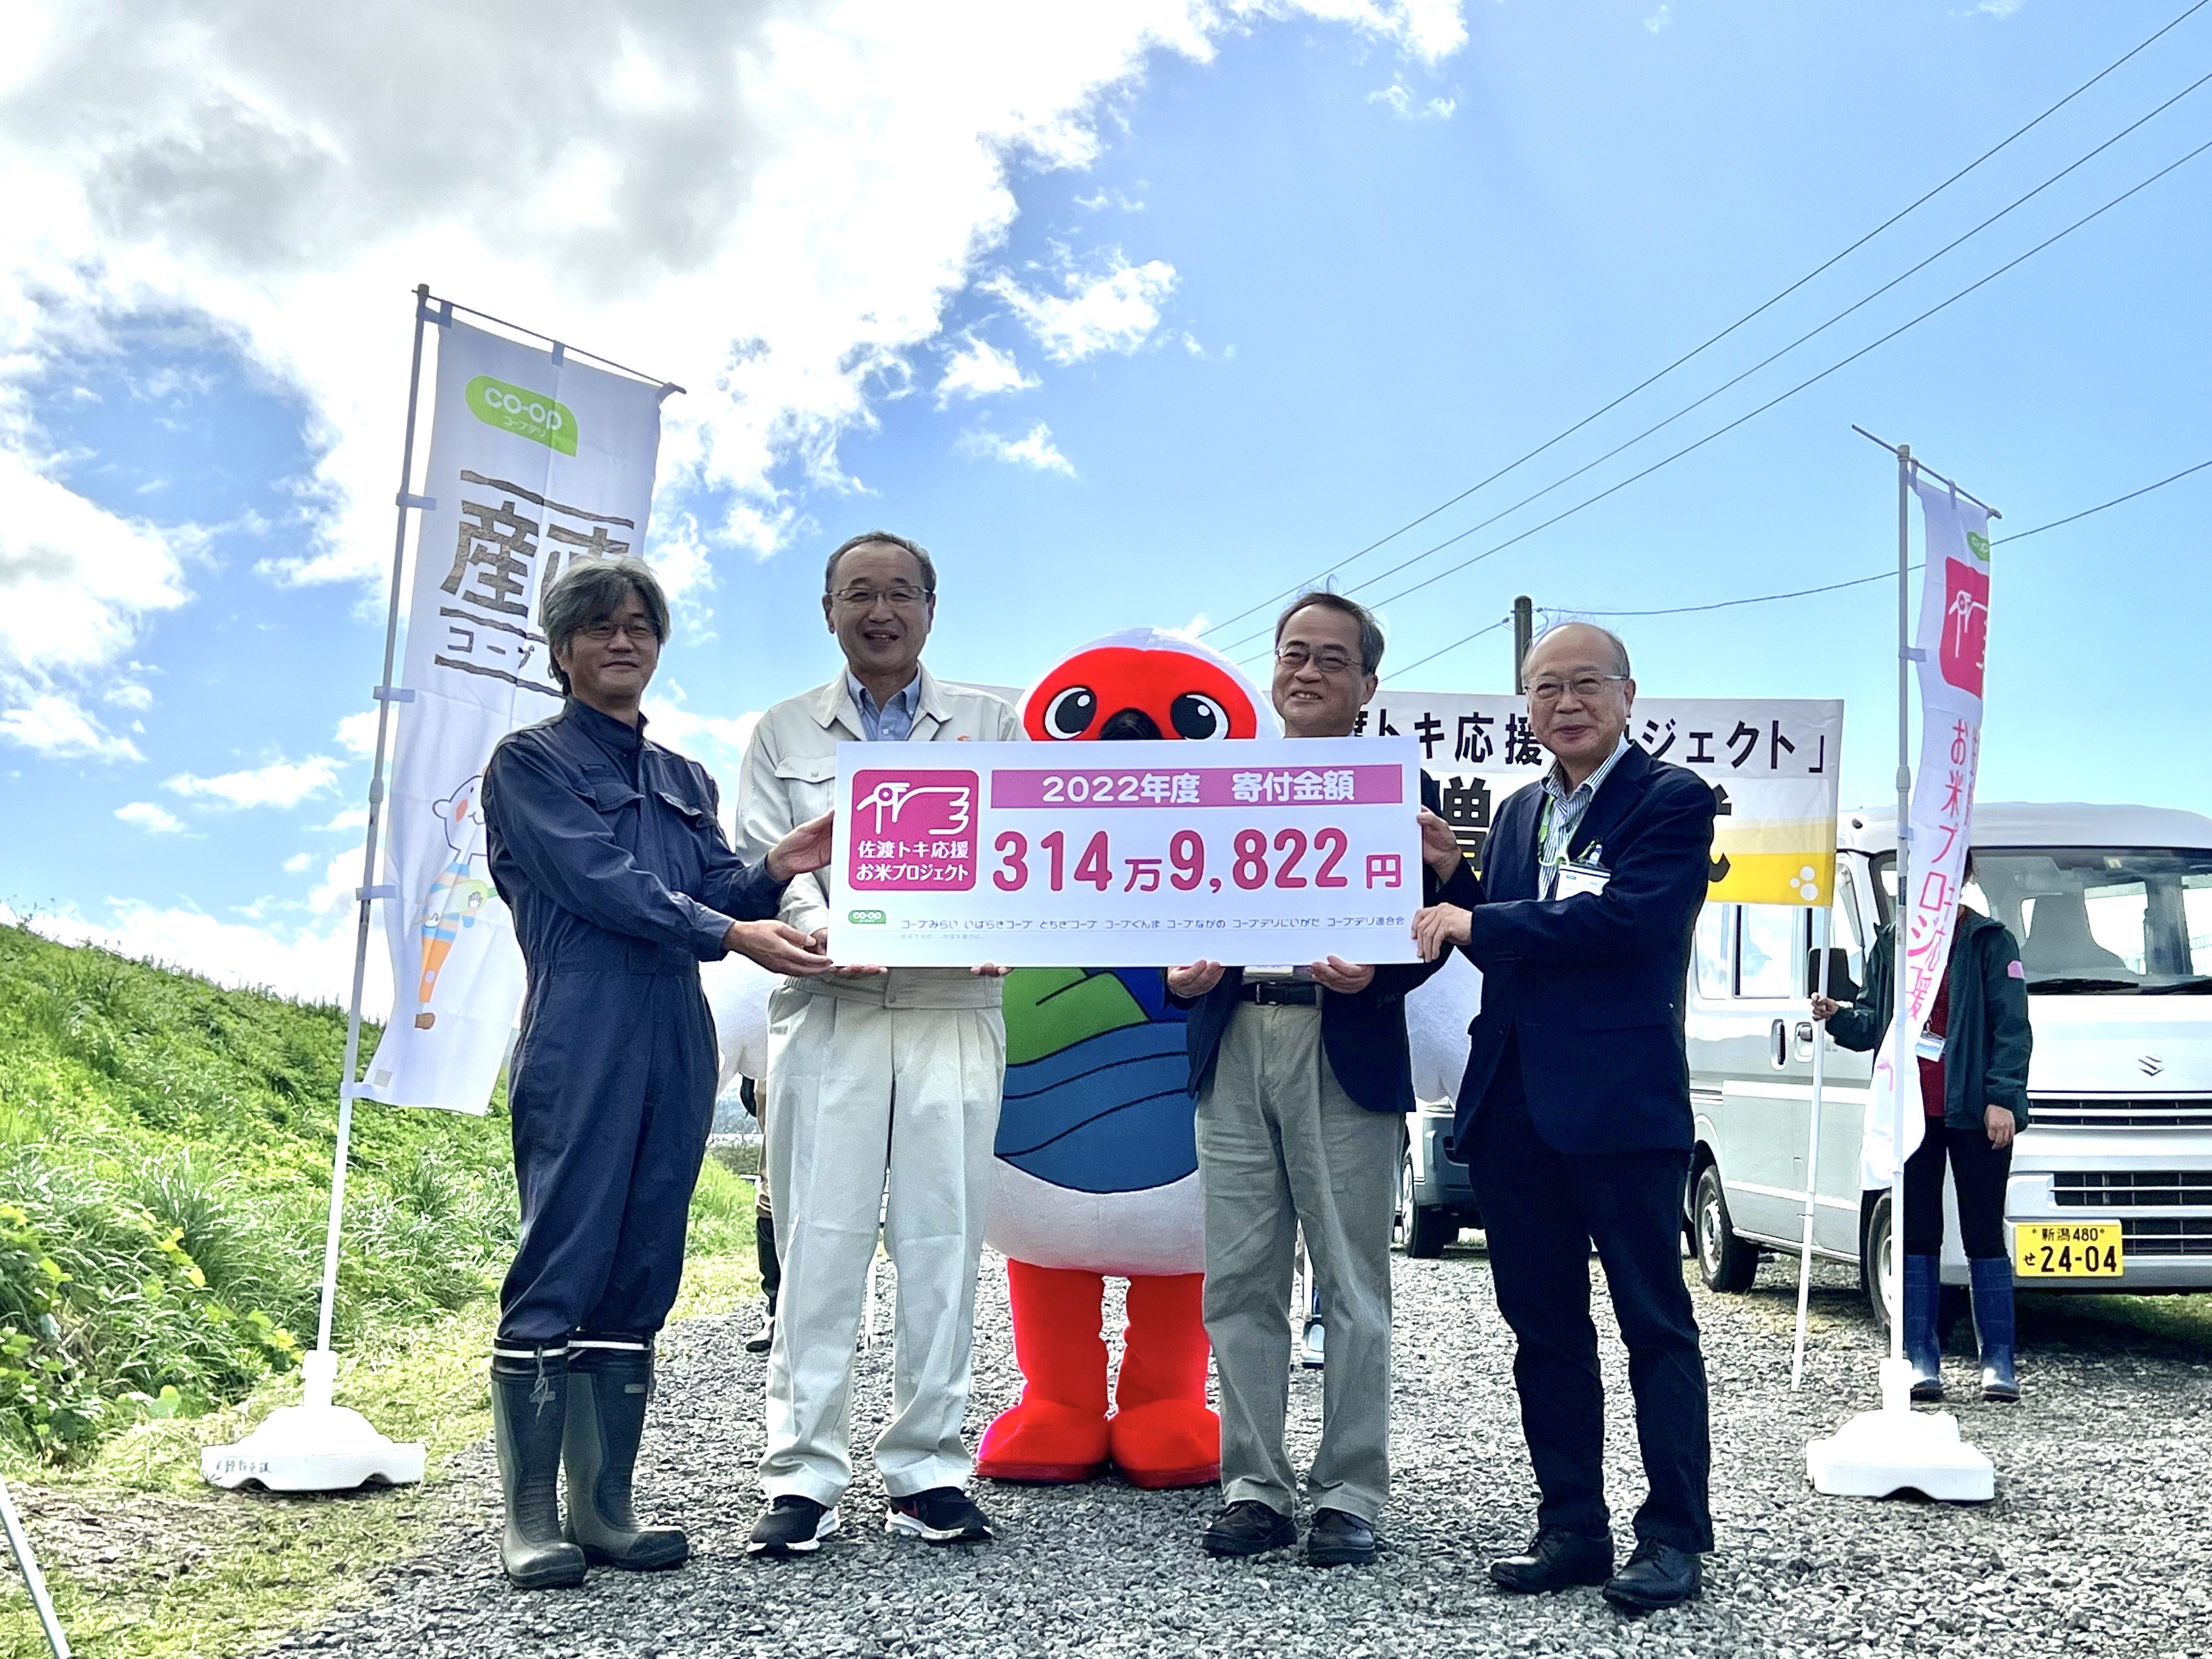 Co-opdeli Group donates 3,149,822 yen to Sado City -Sado Crested Ibis Supporting Rice Project- 